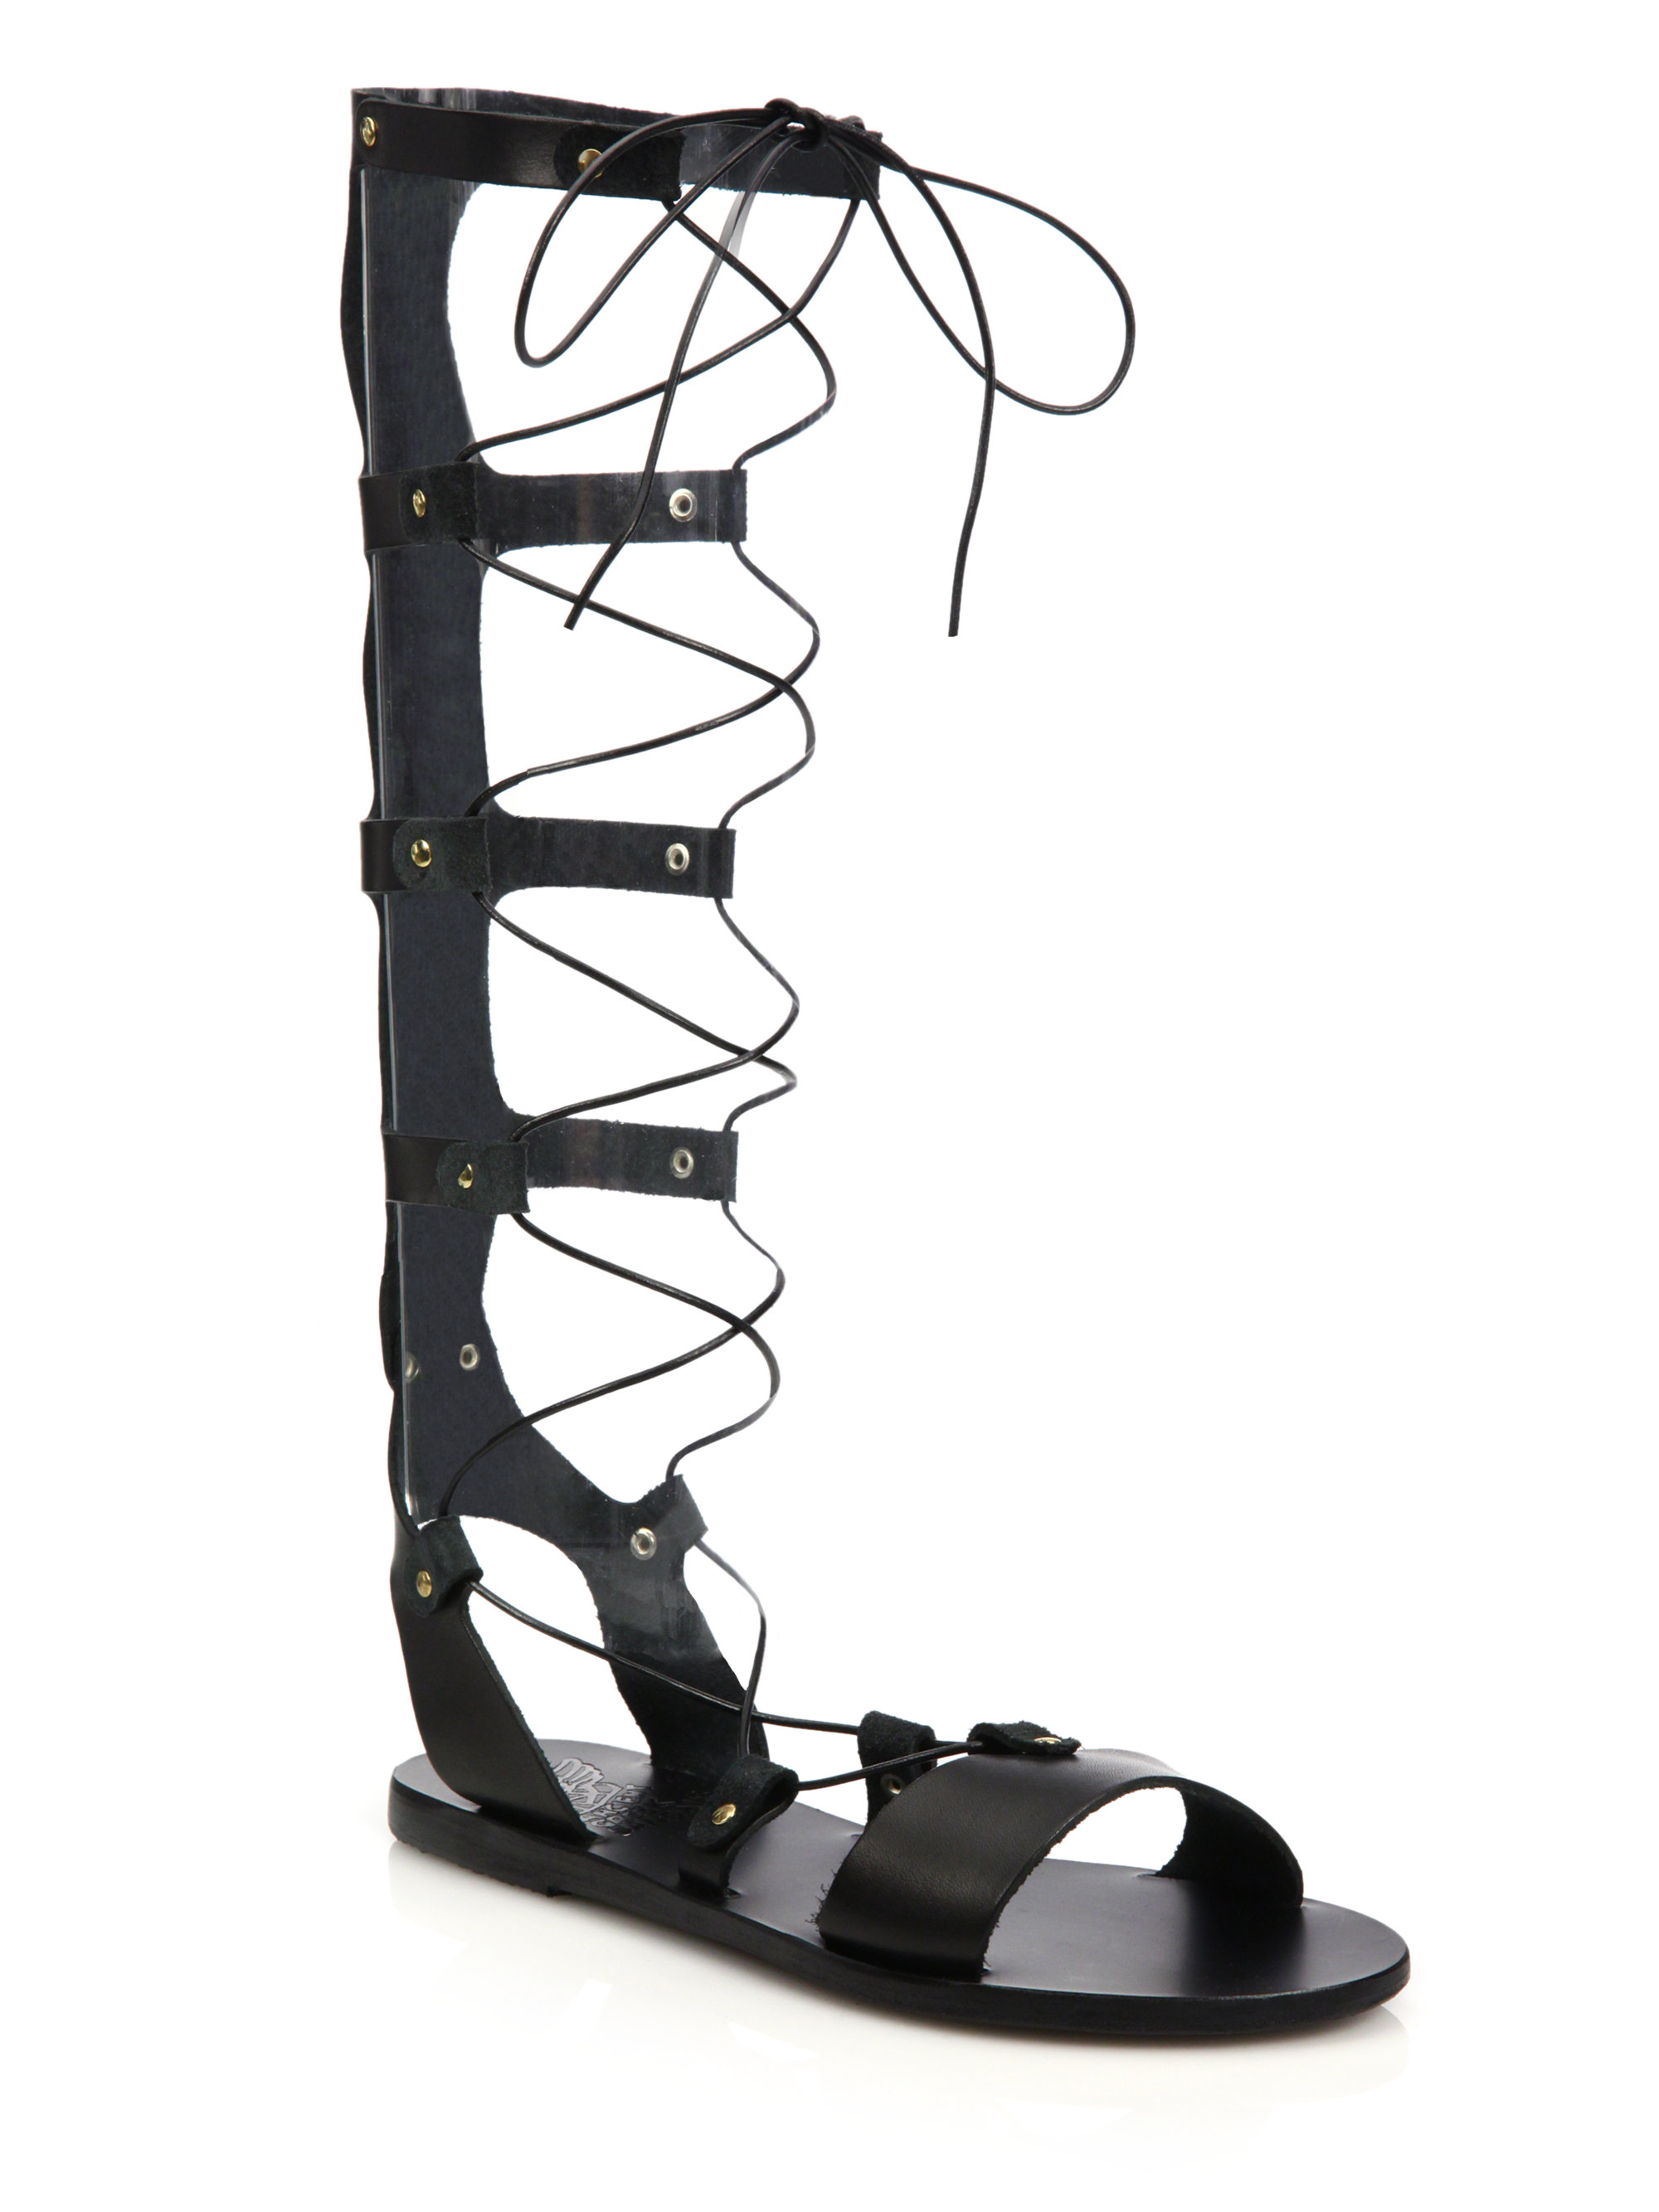 Lyst - Ancient Greek Sandals Thebes Tall Leather Gladiator Sandals in Black